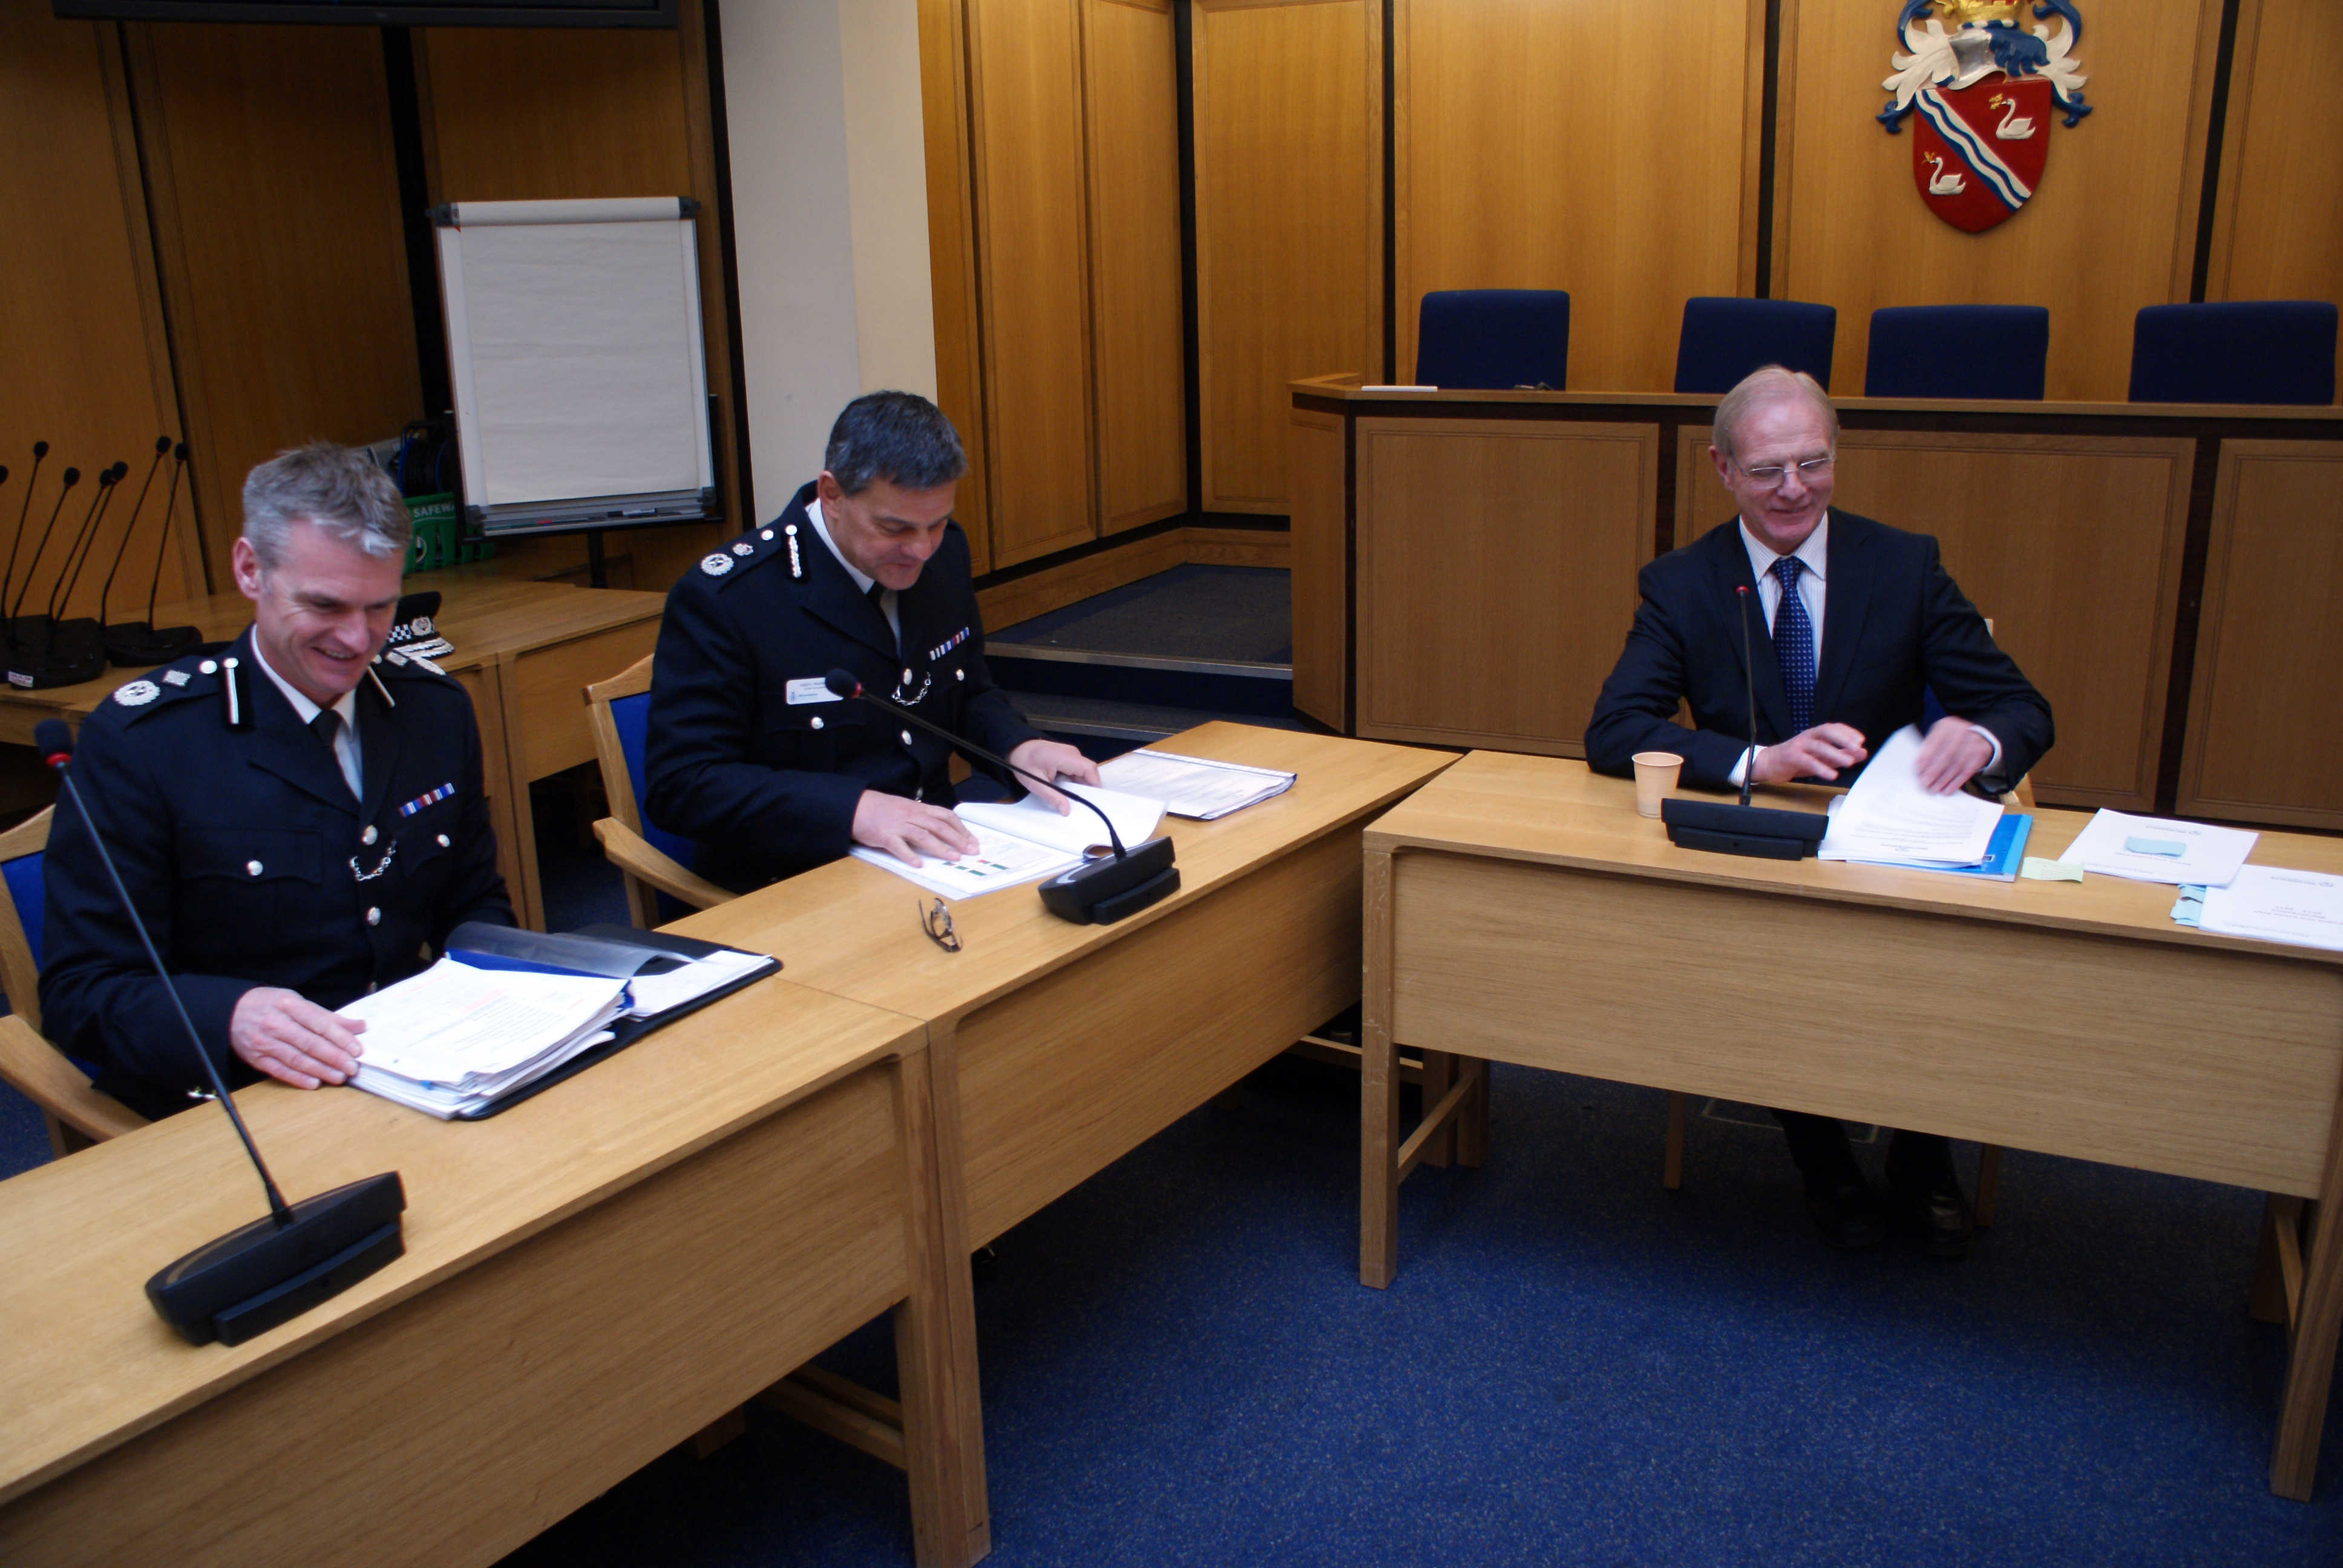 Deputy Chief Constable Neil brunton, Chief Constable Andy Parker and Warwickshire Police and Crime Commissioner Ron Ball